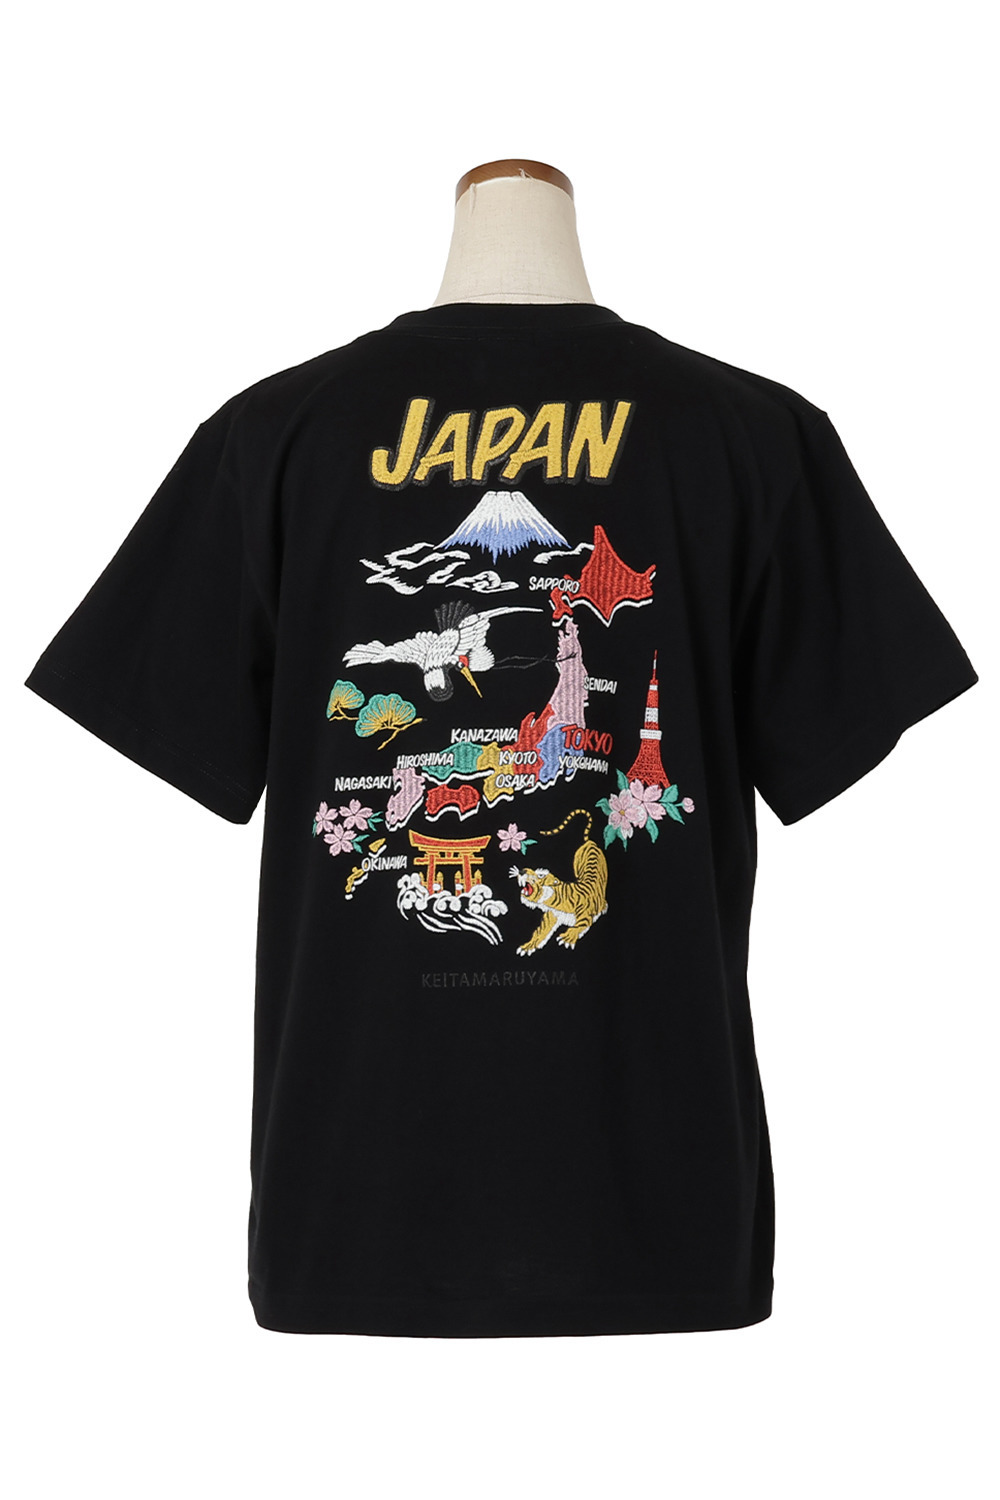 JAPAN Embroidery Style Print Tシャツ 詳細画像 ホワイト 6